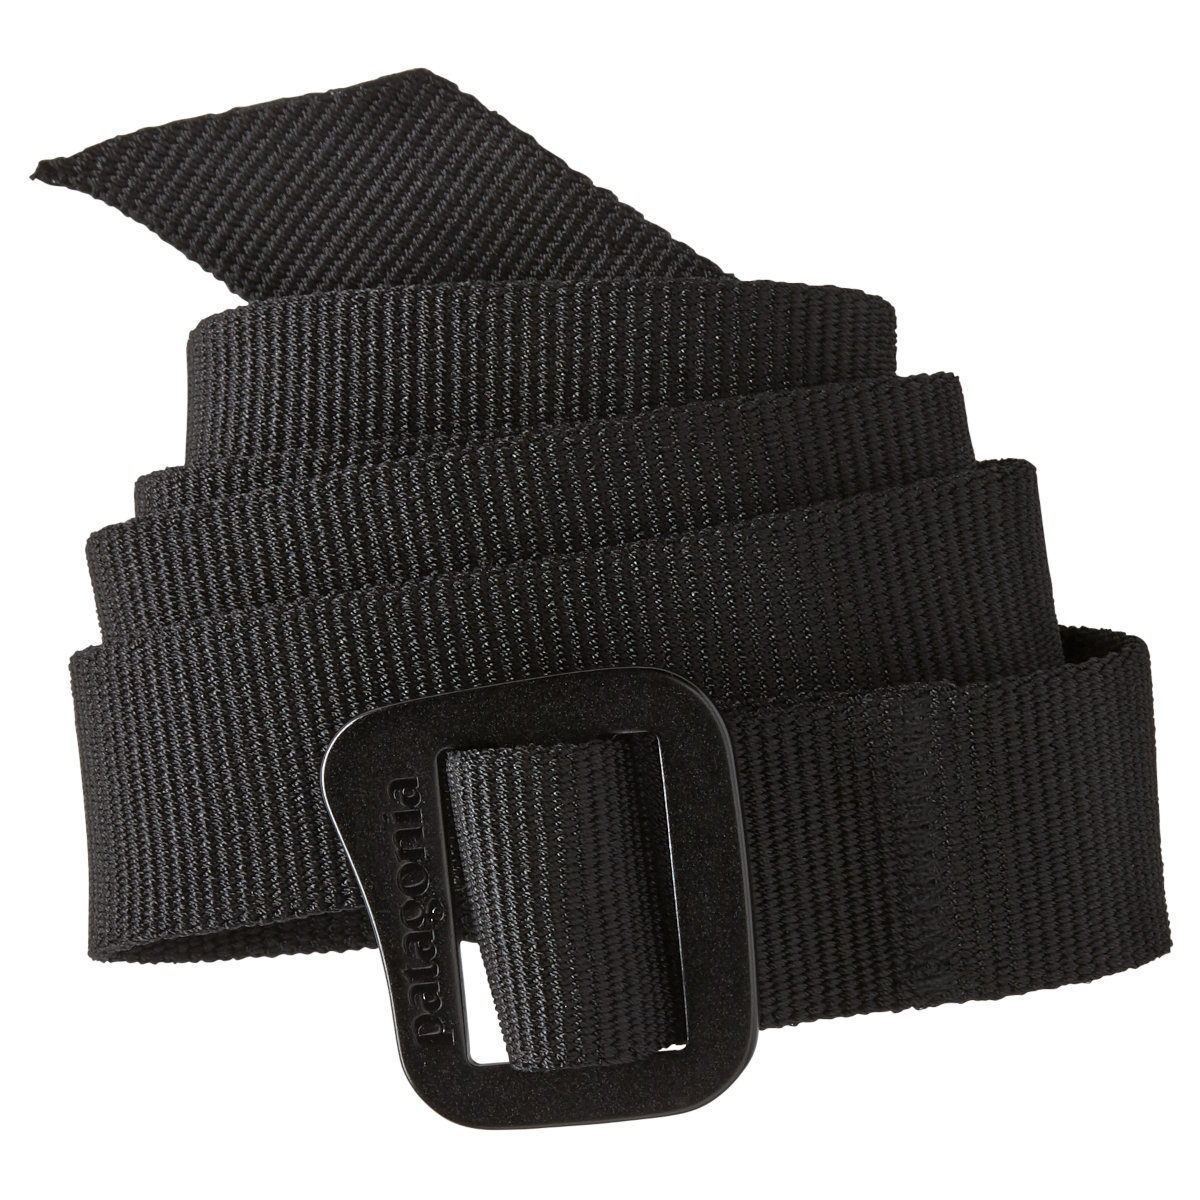 Picture of Patagonia Friction Belt - Black